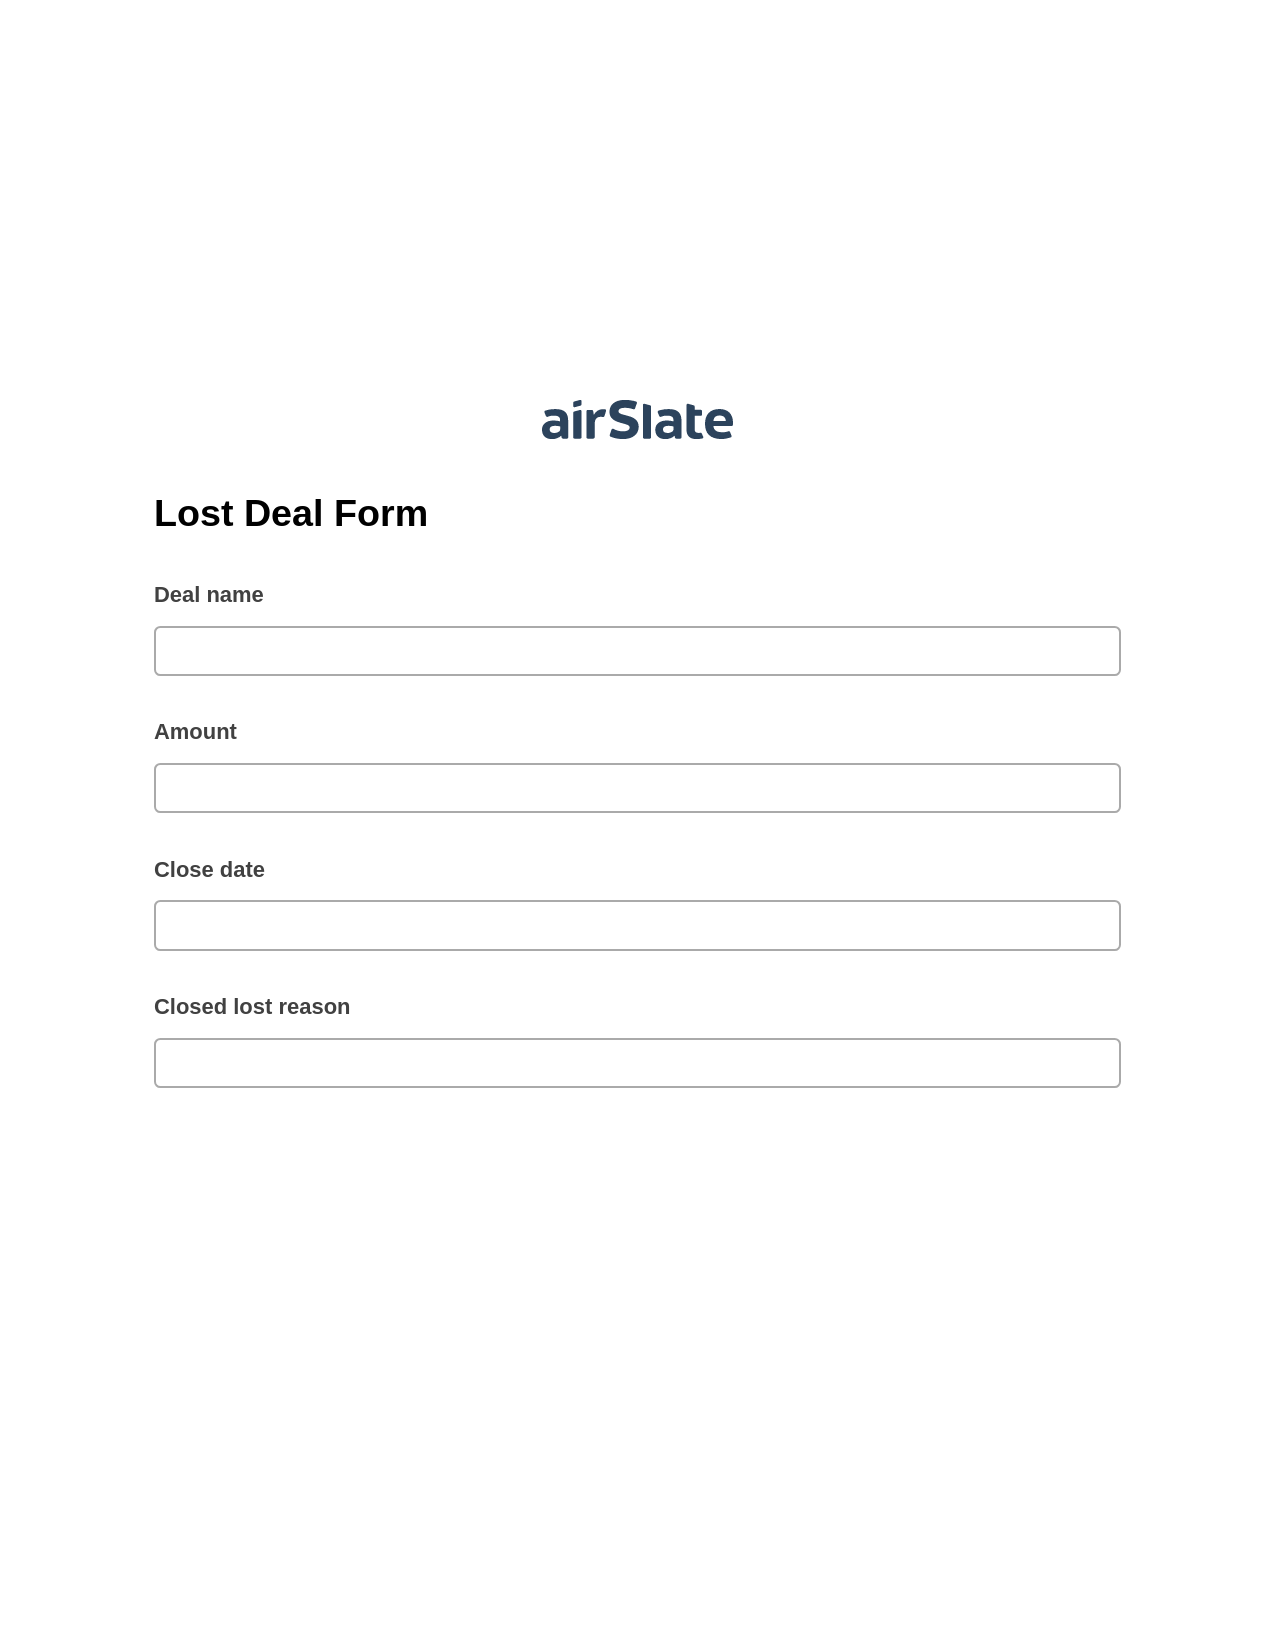 Lost Deal Form Pre-fill Document Bot, Reminder Bot, Export to WebMerge Bot